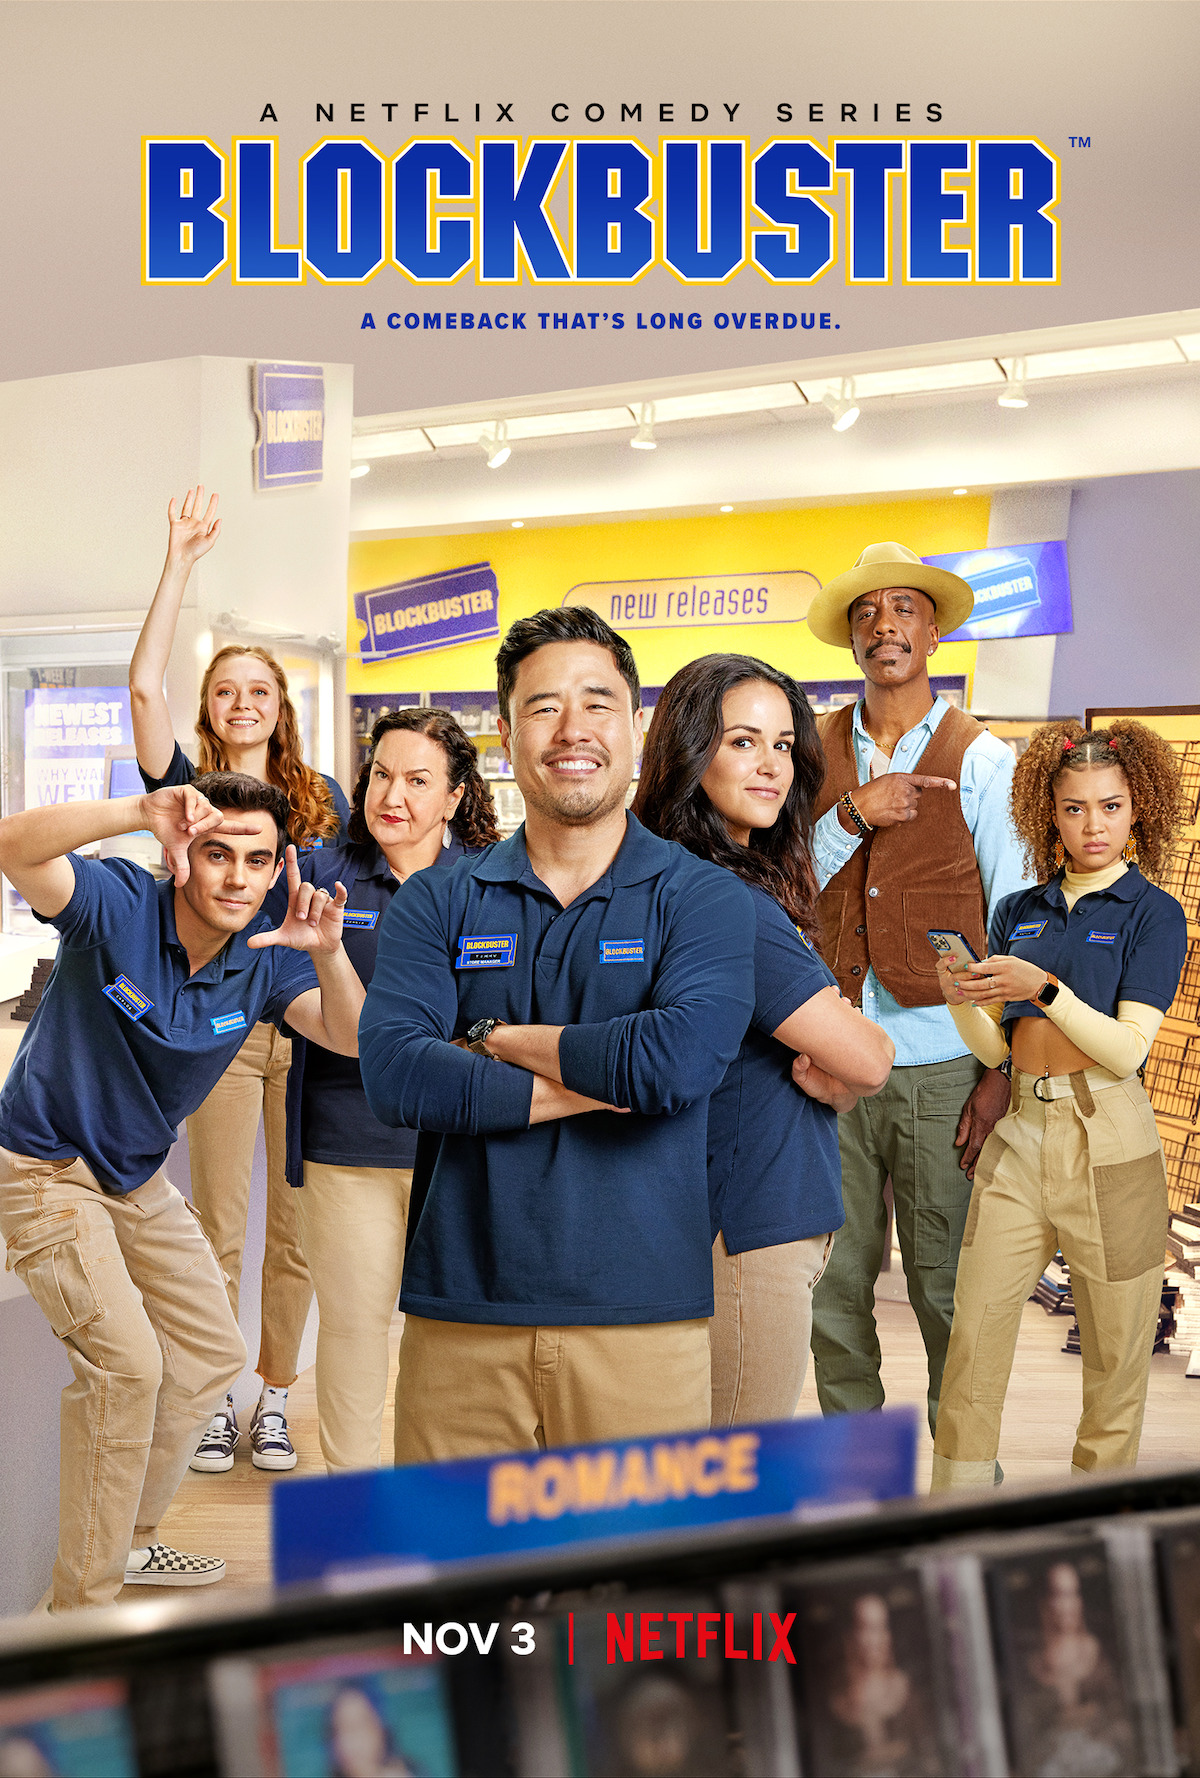 Superstore' Got a Title Change at the Last Minute